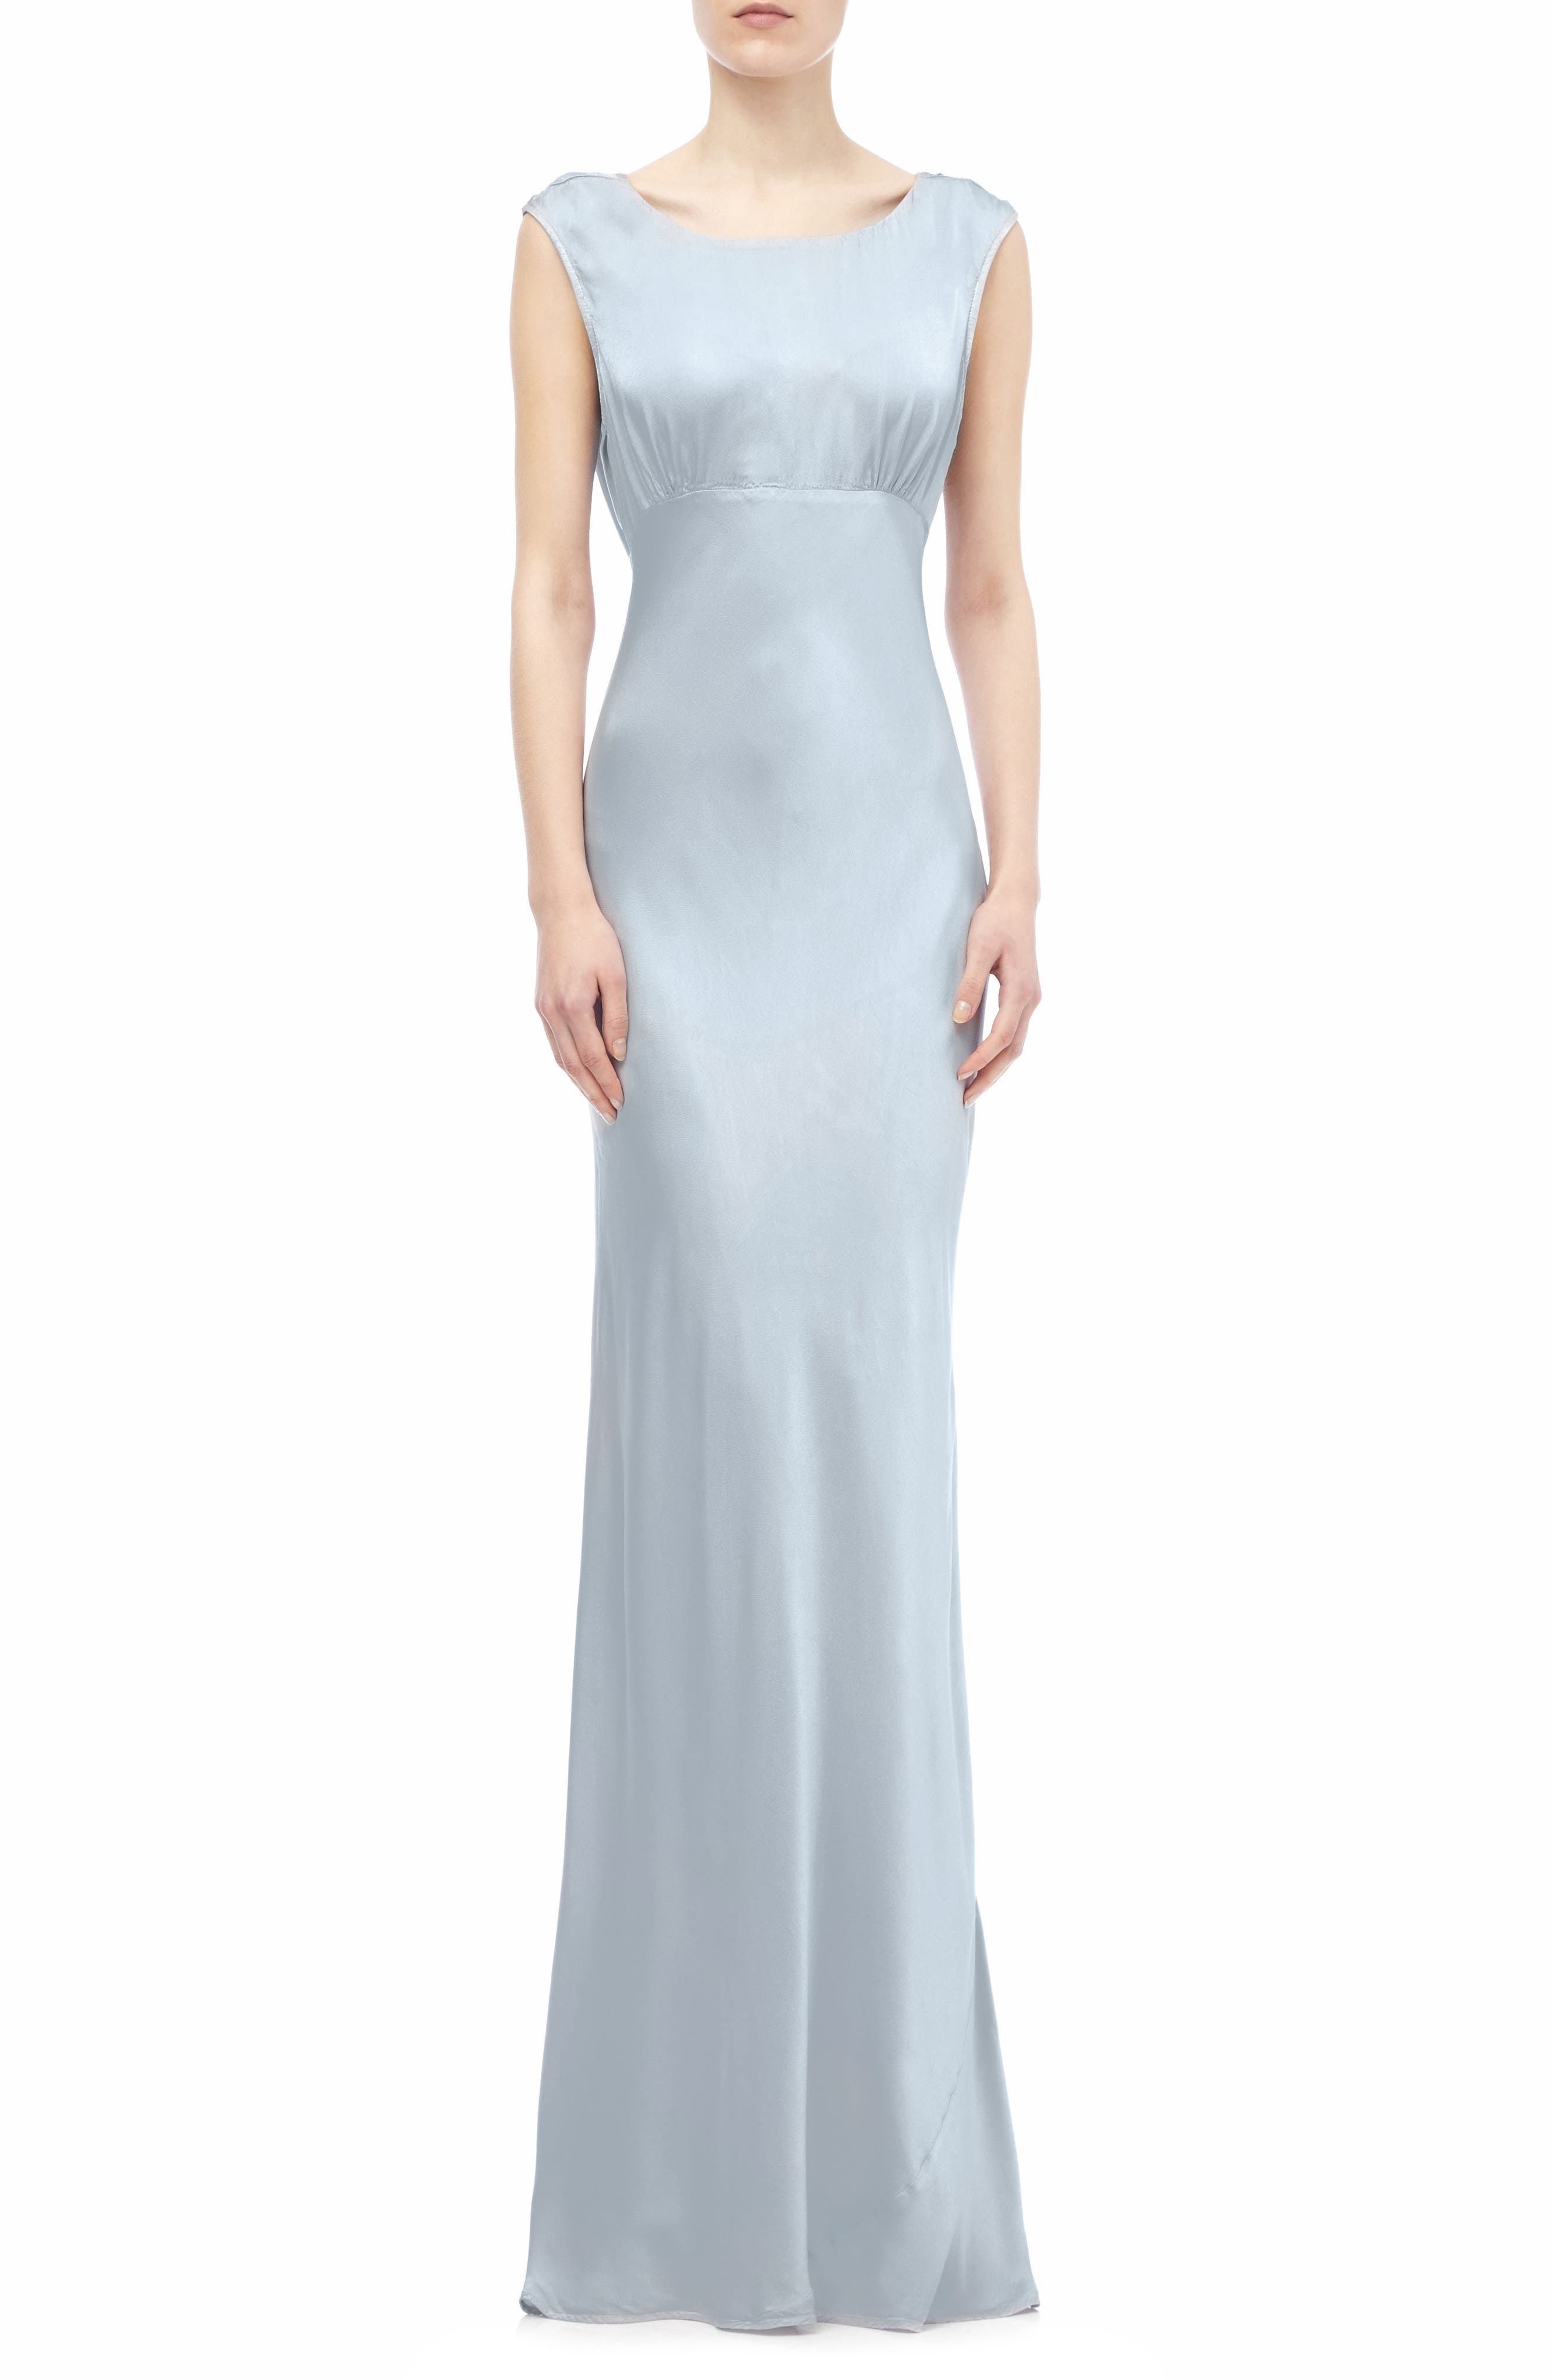 Ghost London Salma Cowl Back Gown 